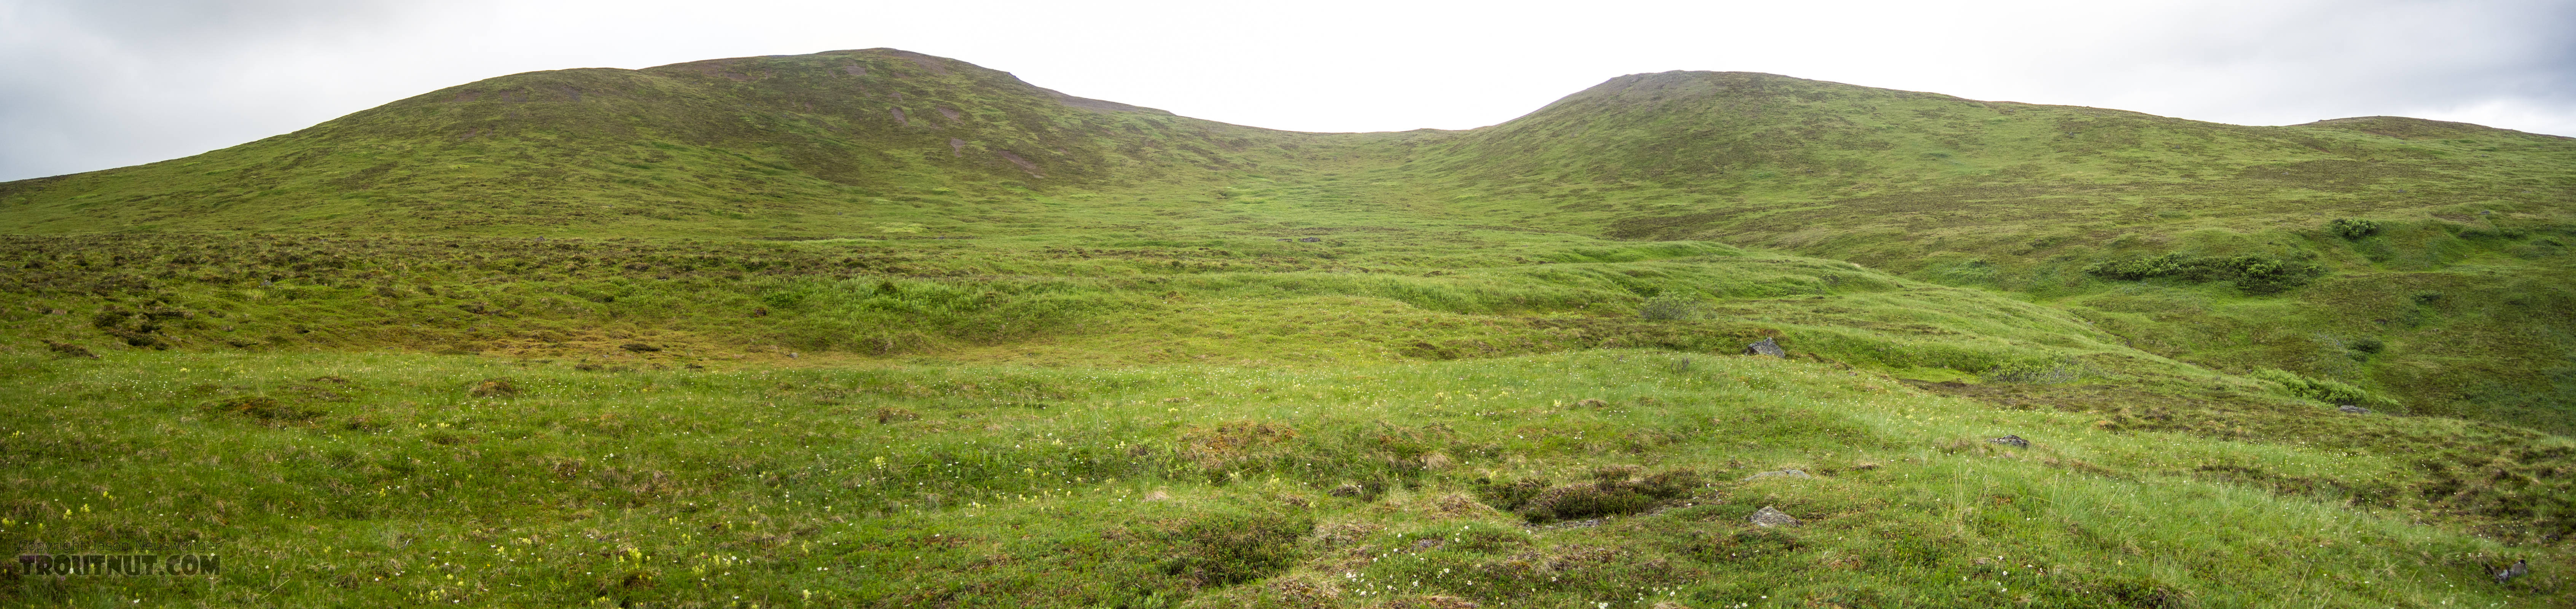 Panoramic view of the mile-wide shoulder of a tundra ridge with a little valley in the middle. From Clearwater Mountains in Alaska.